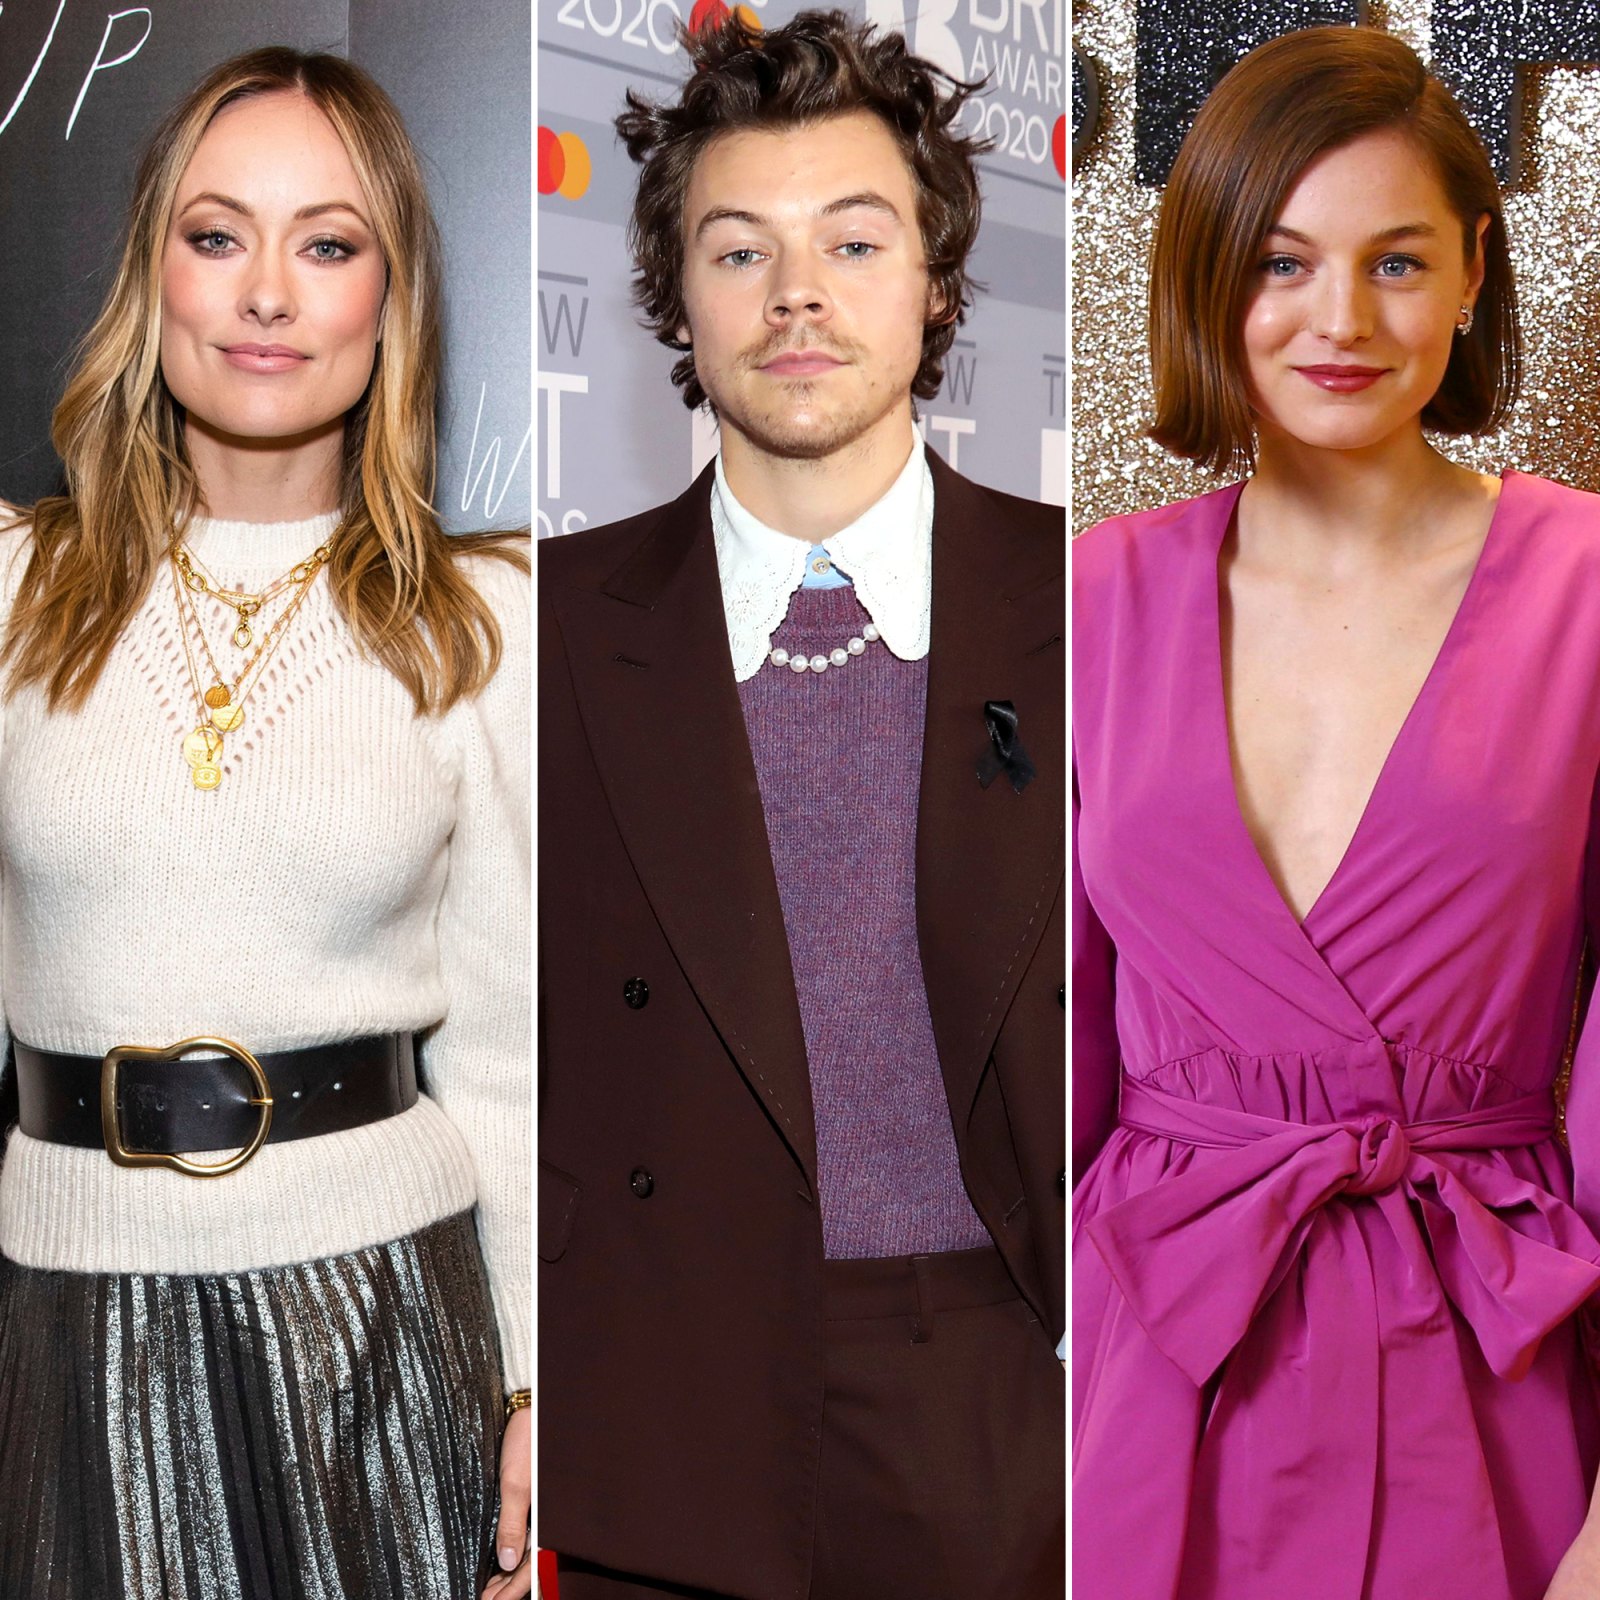 Olivia Wilde Is ‘Not Bothered’ by Harry Styles’ Steamy Scenes With ‘My Policeman’ Costar Emma Corrin: ‘She’s Confident’